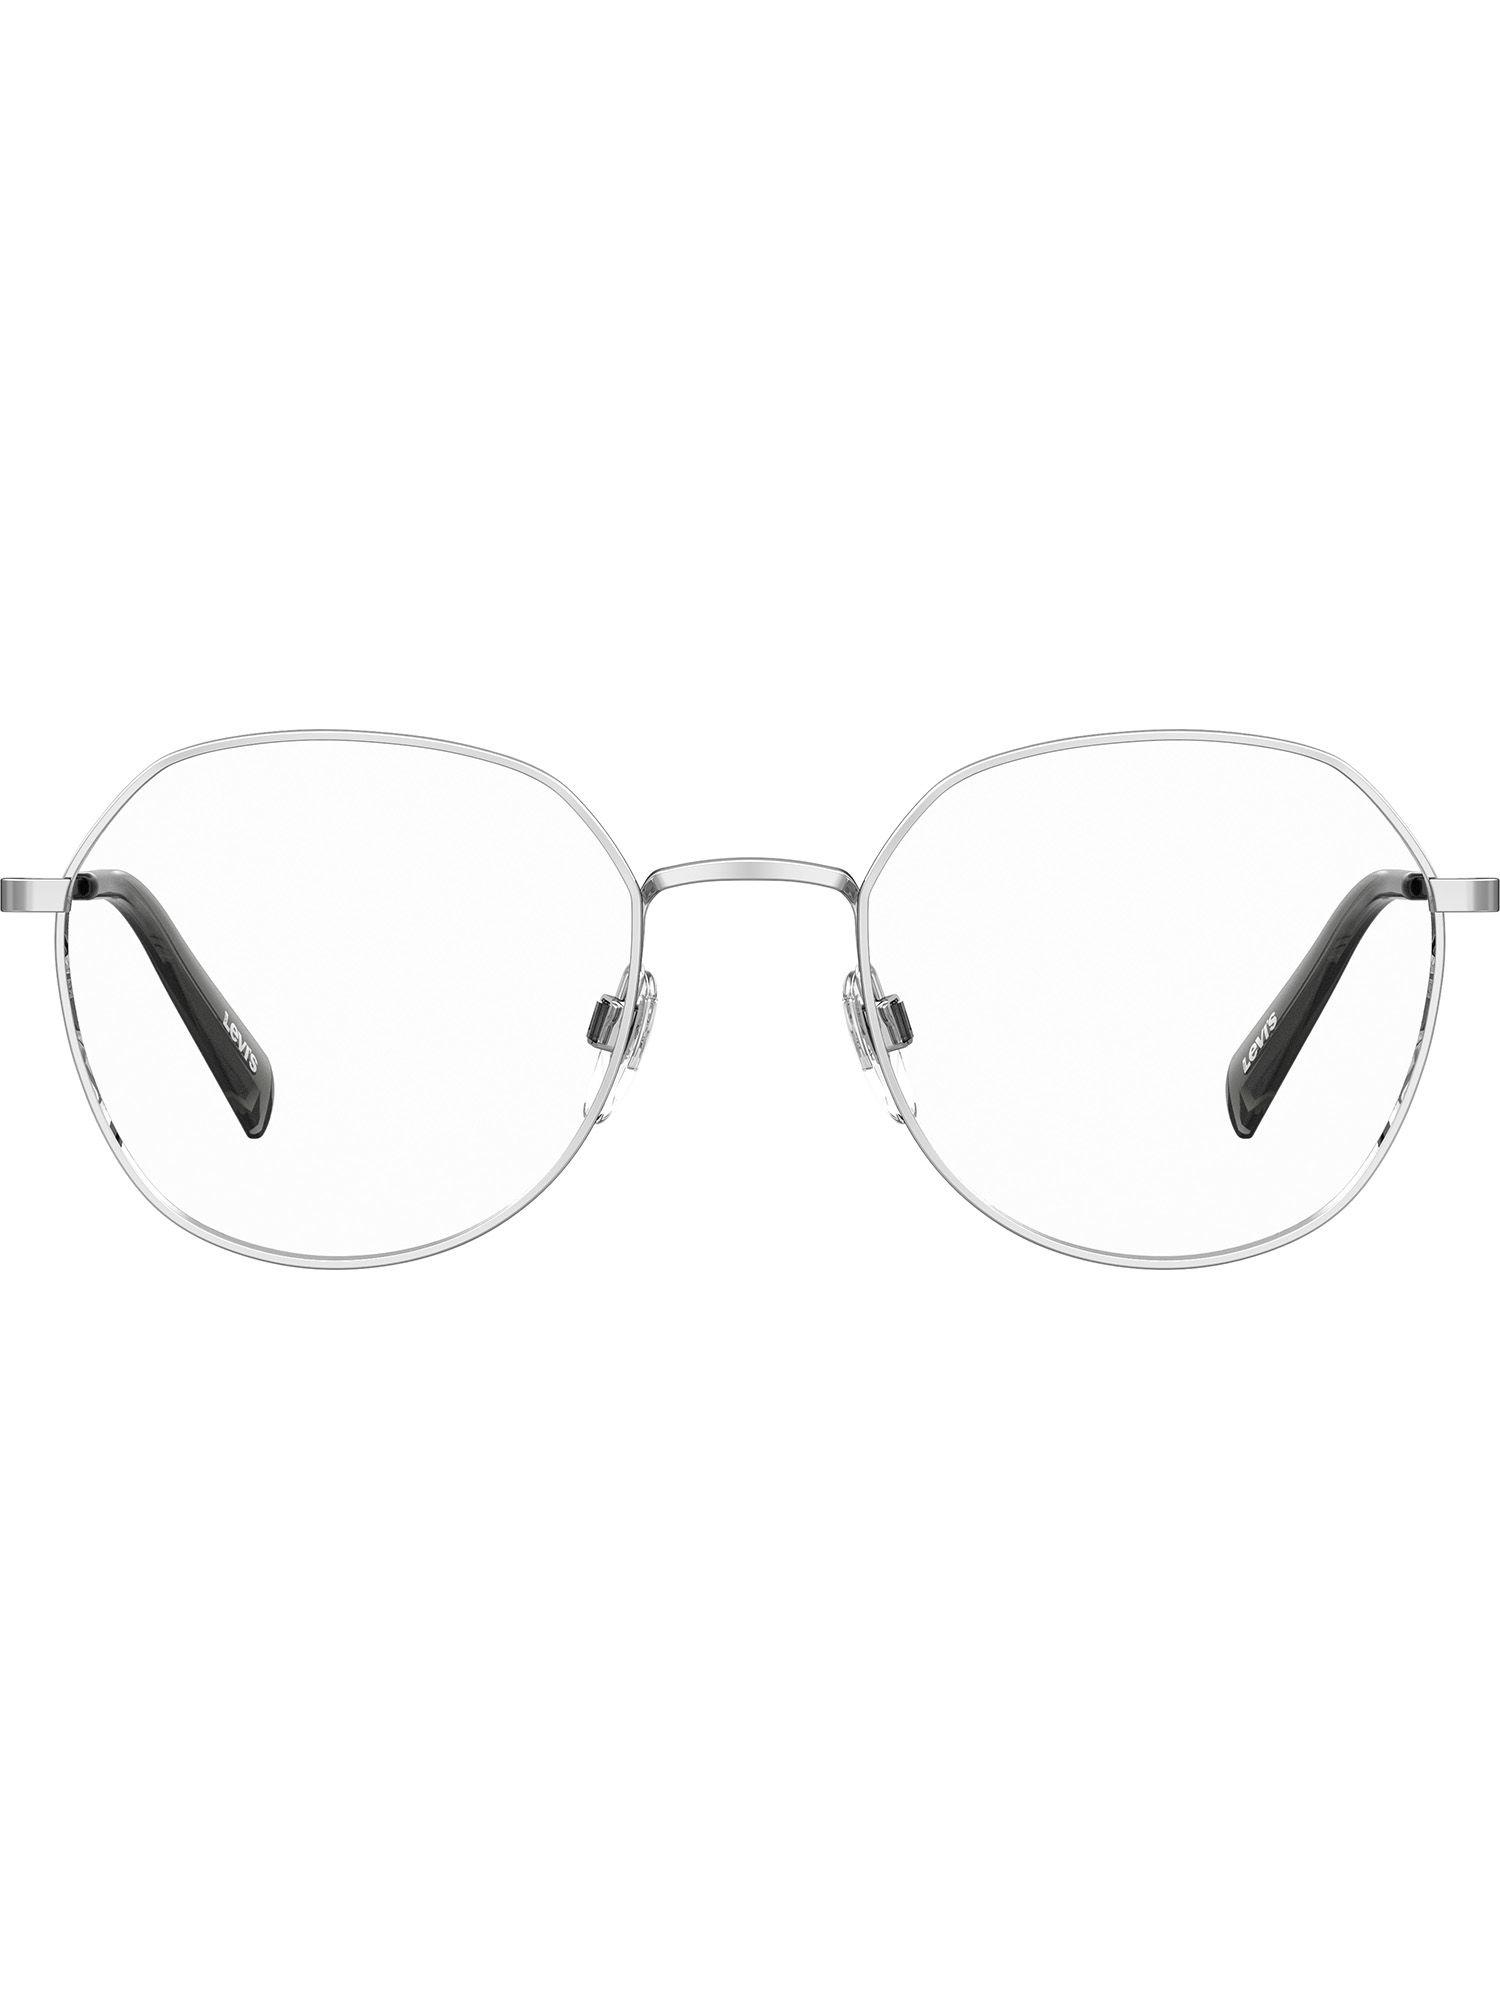 round-oval-frame-for-men-and-women-metal-material-in-palladium-colour-(lv-1014-010-5220)